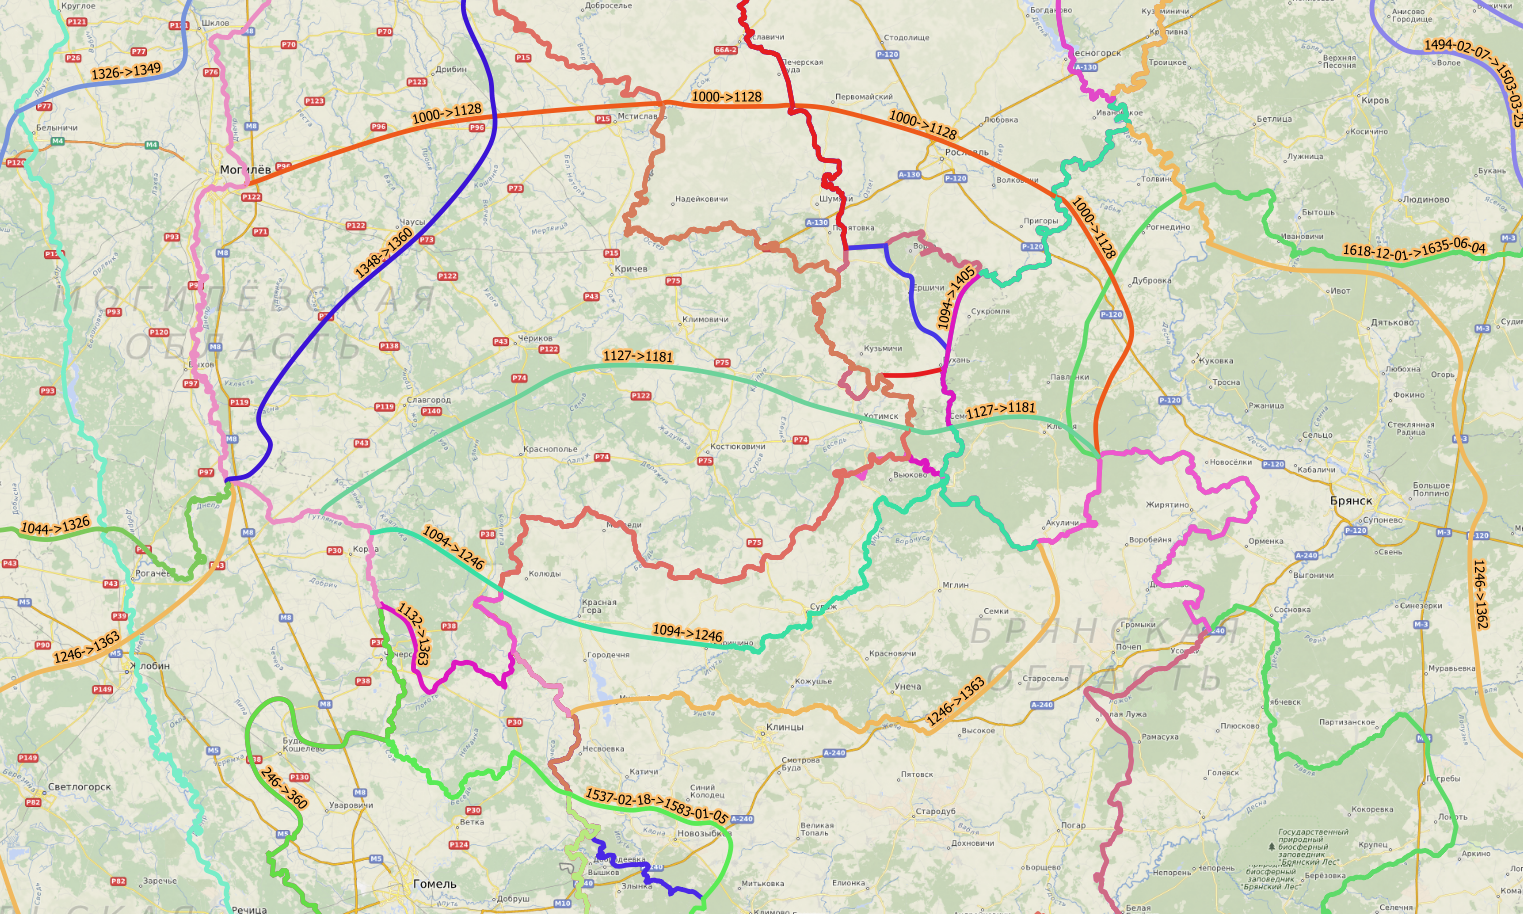 An example of boundaries changes in Bryansk (Russia) and Mogilev (Belarus) regions